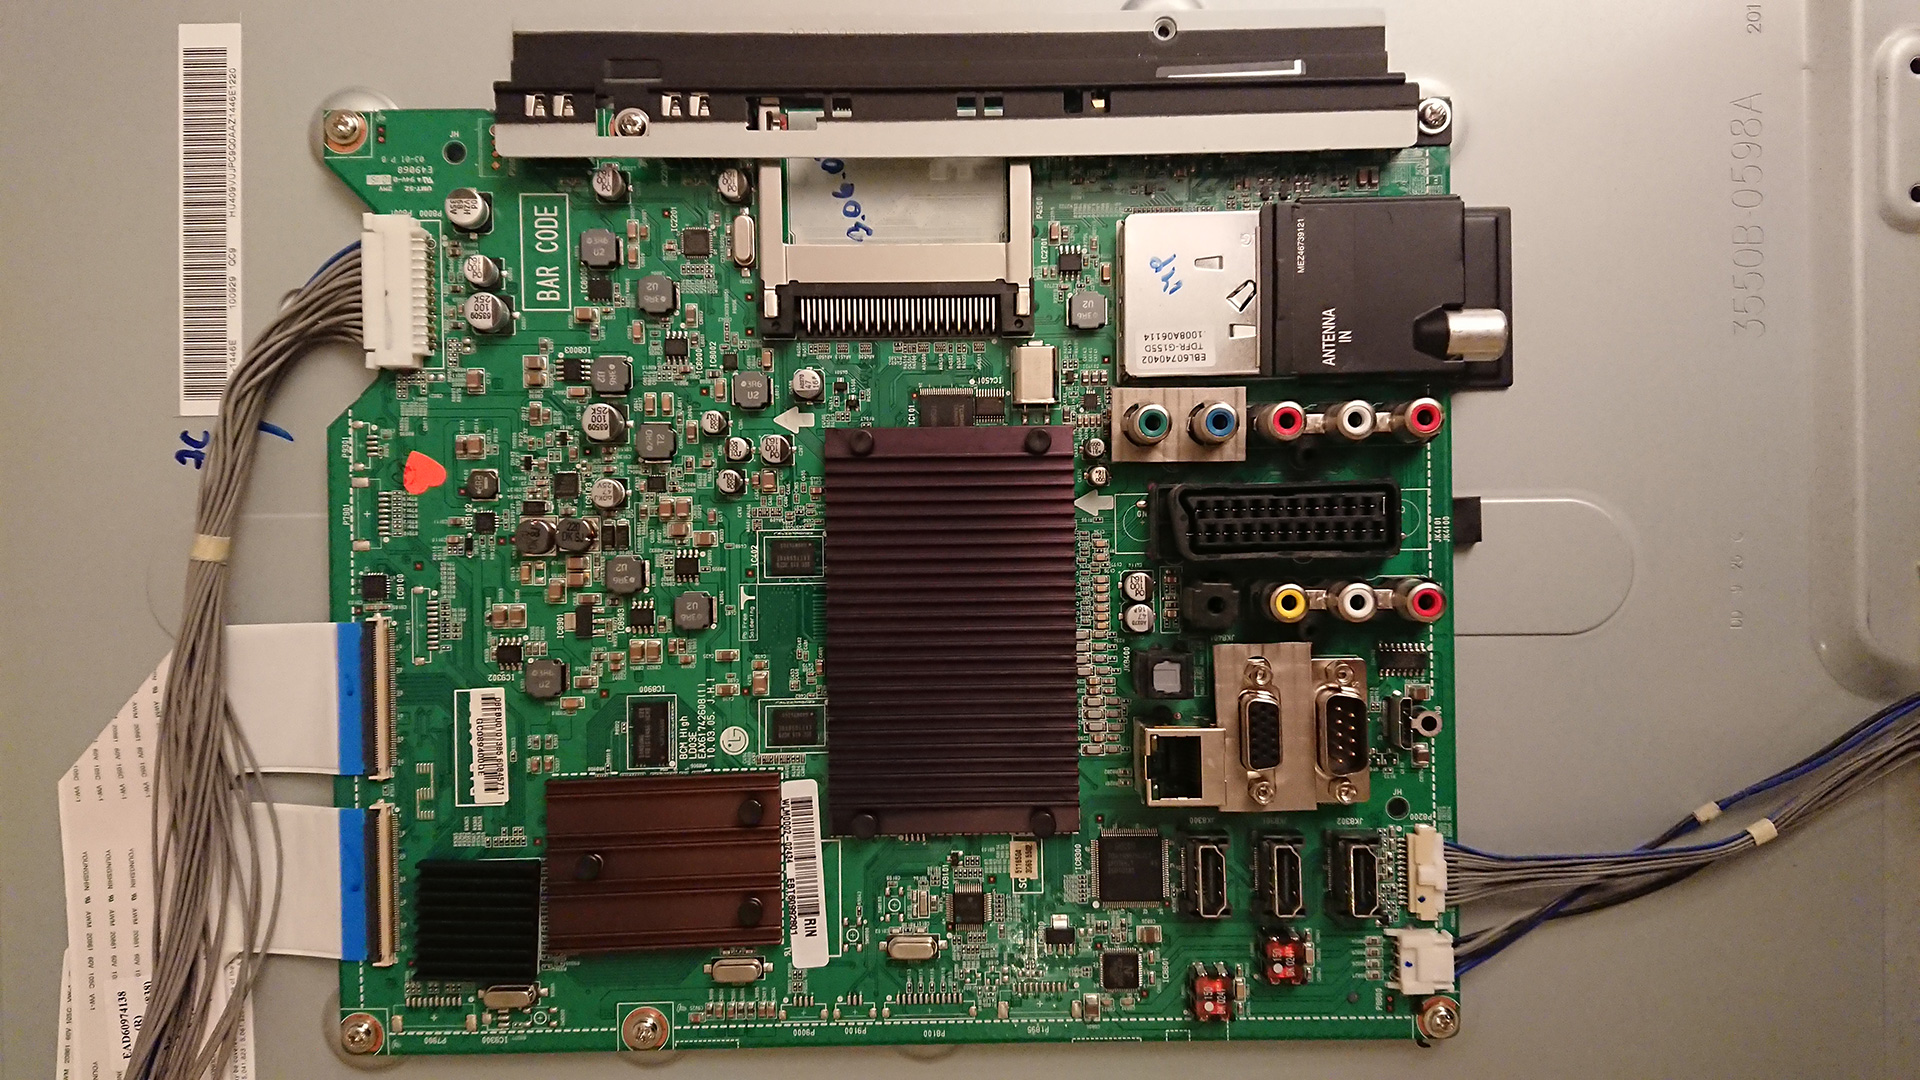 A LG motherboard producing the "No signal" message